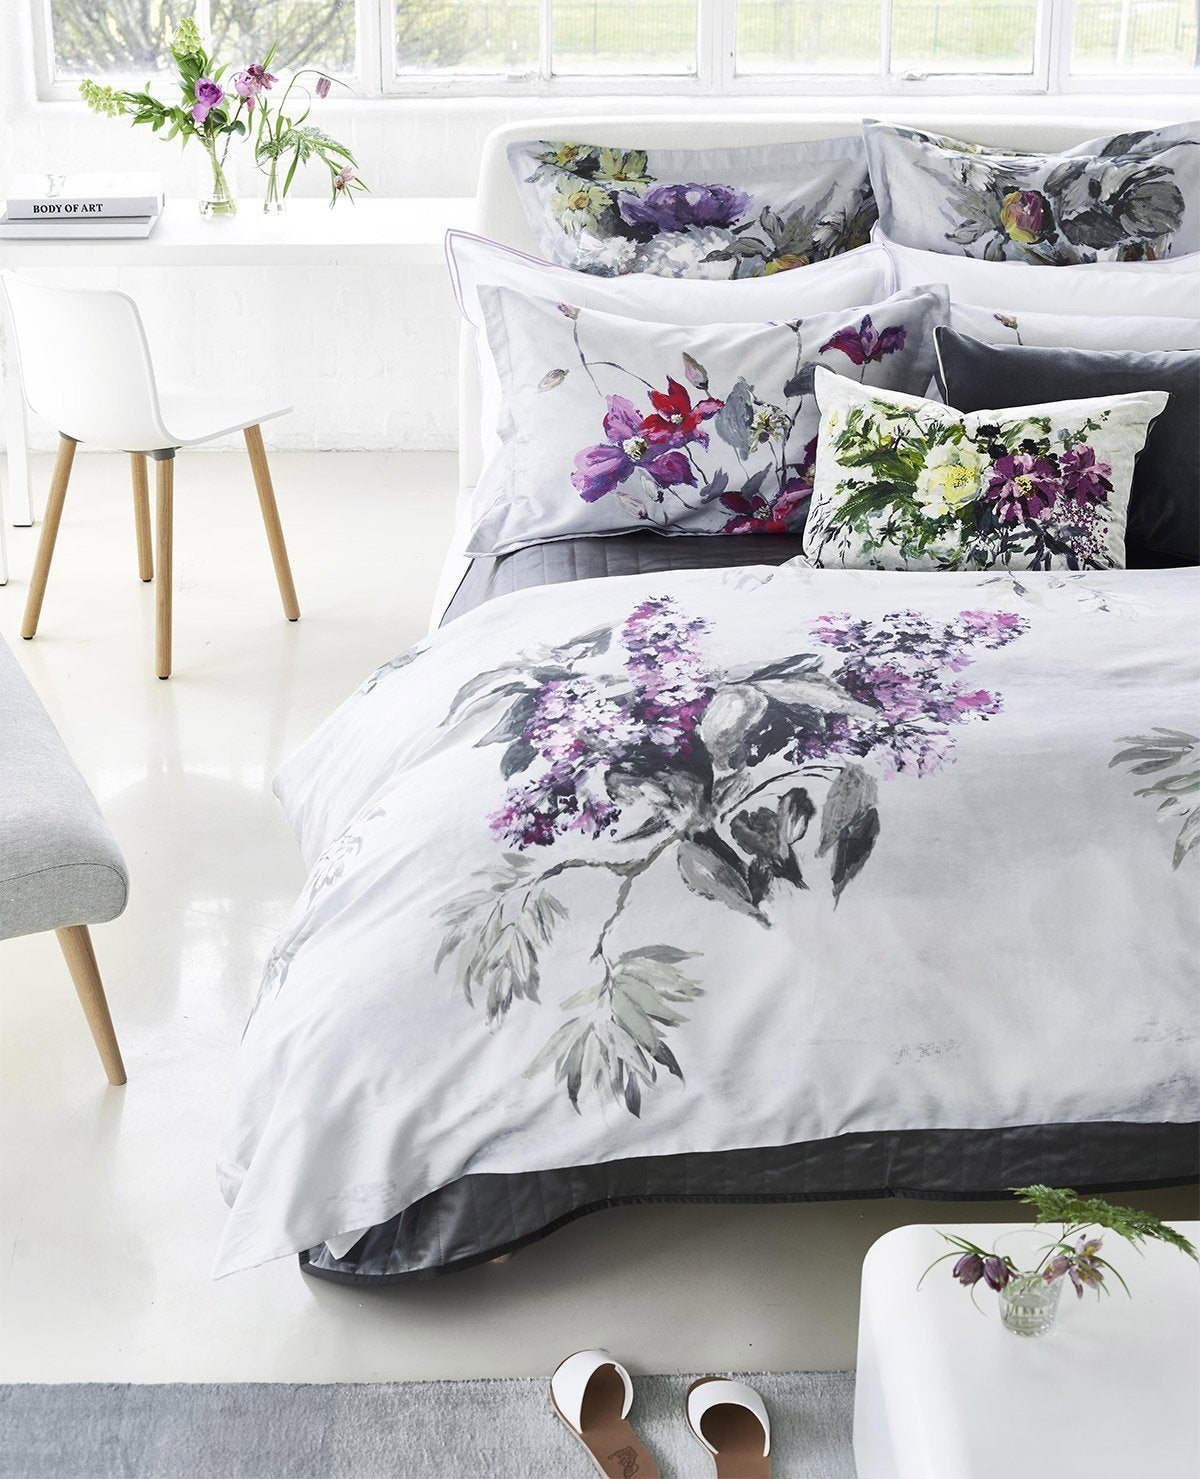 5 Tips to Refresh Your Bedroom for Spring